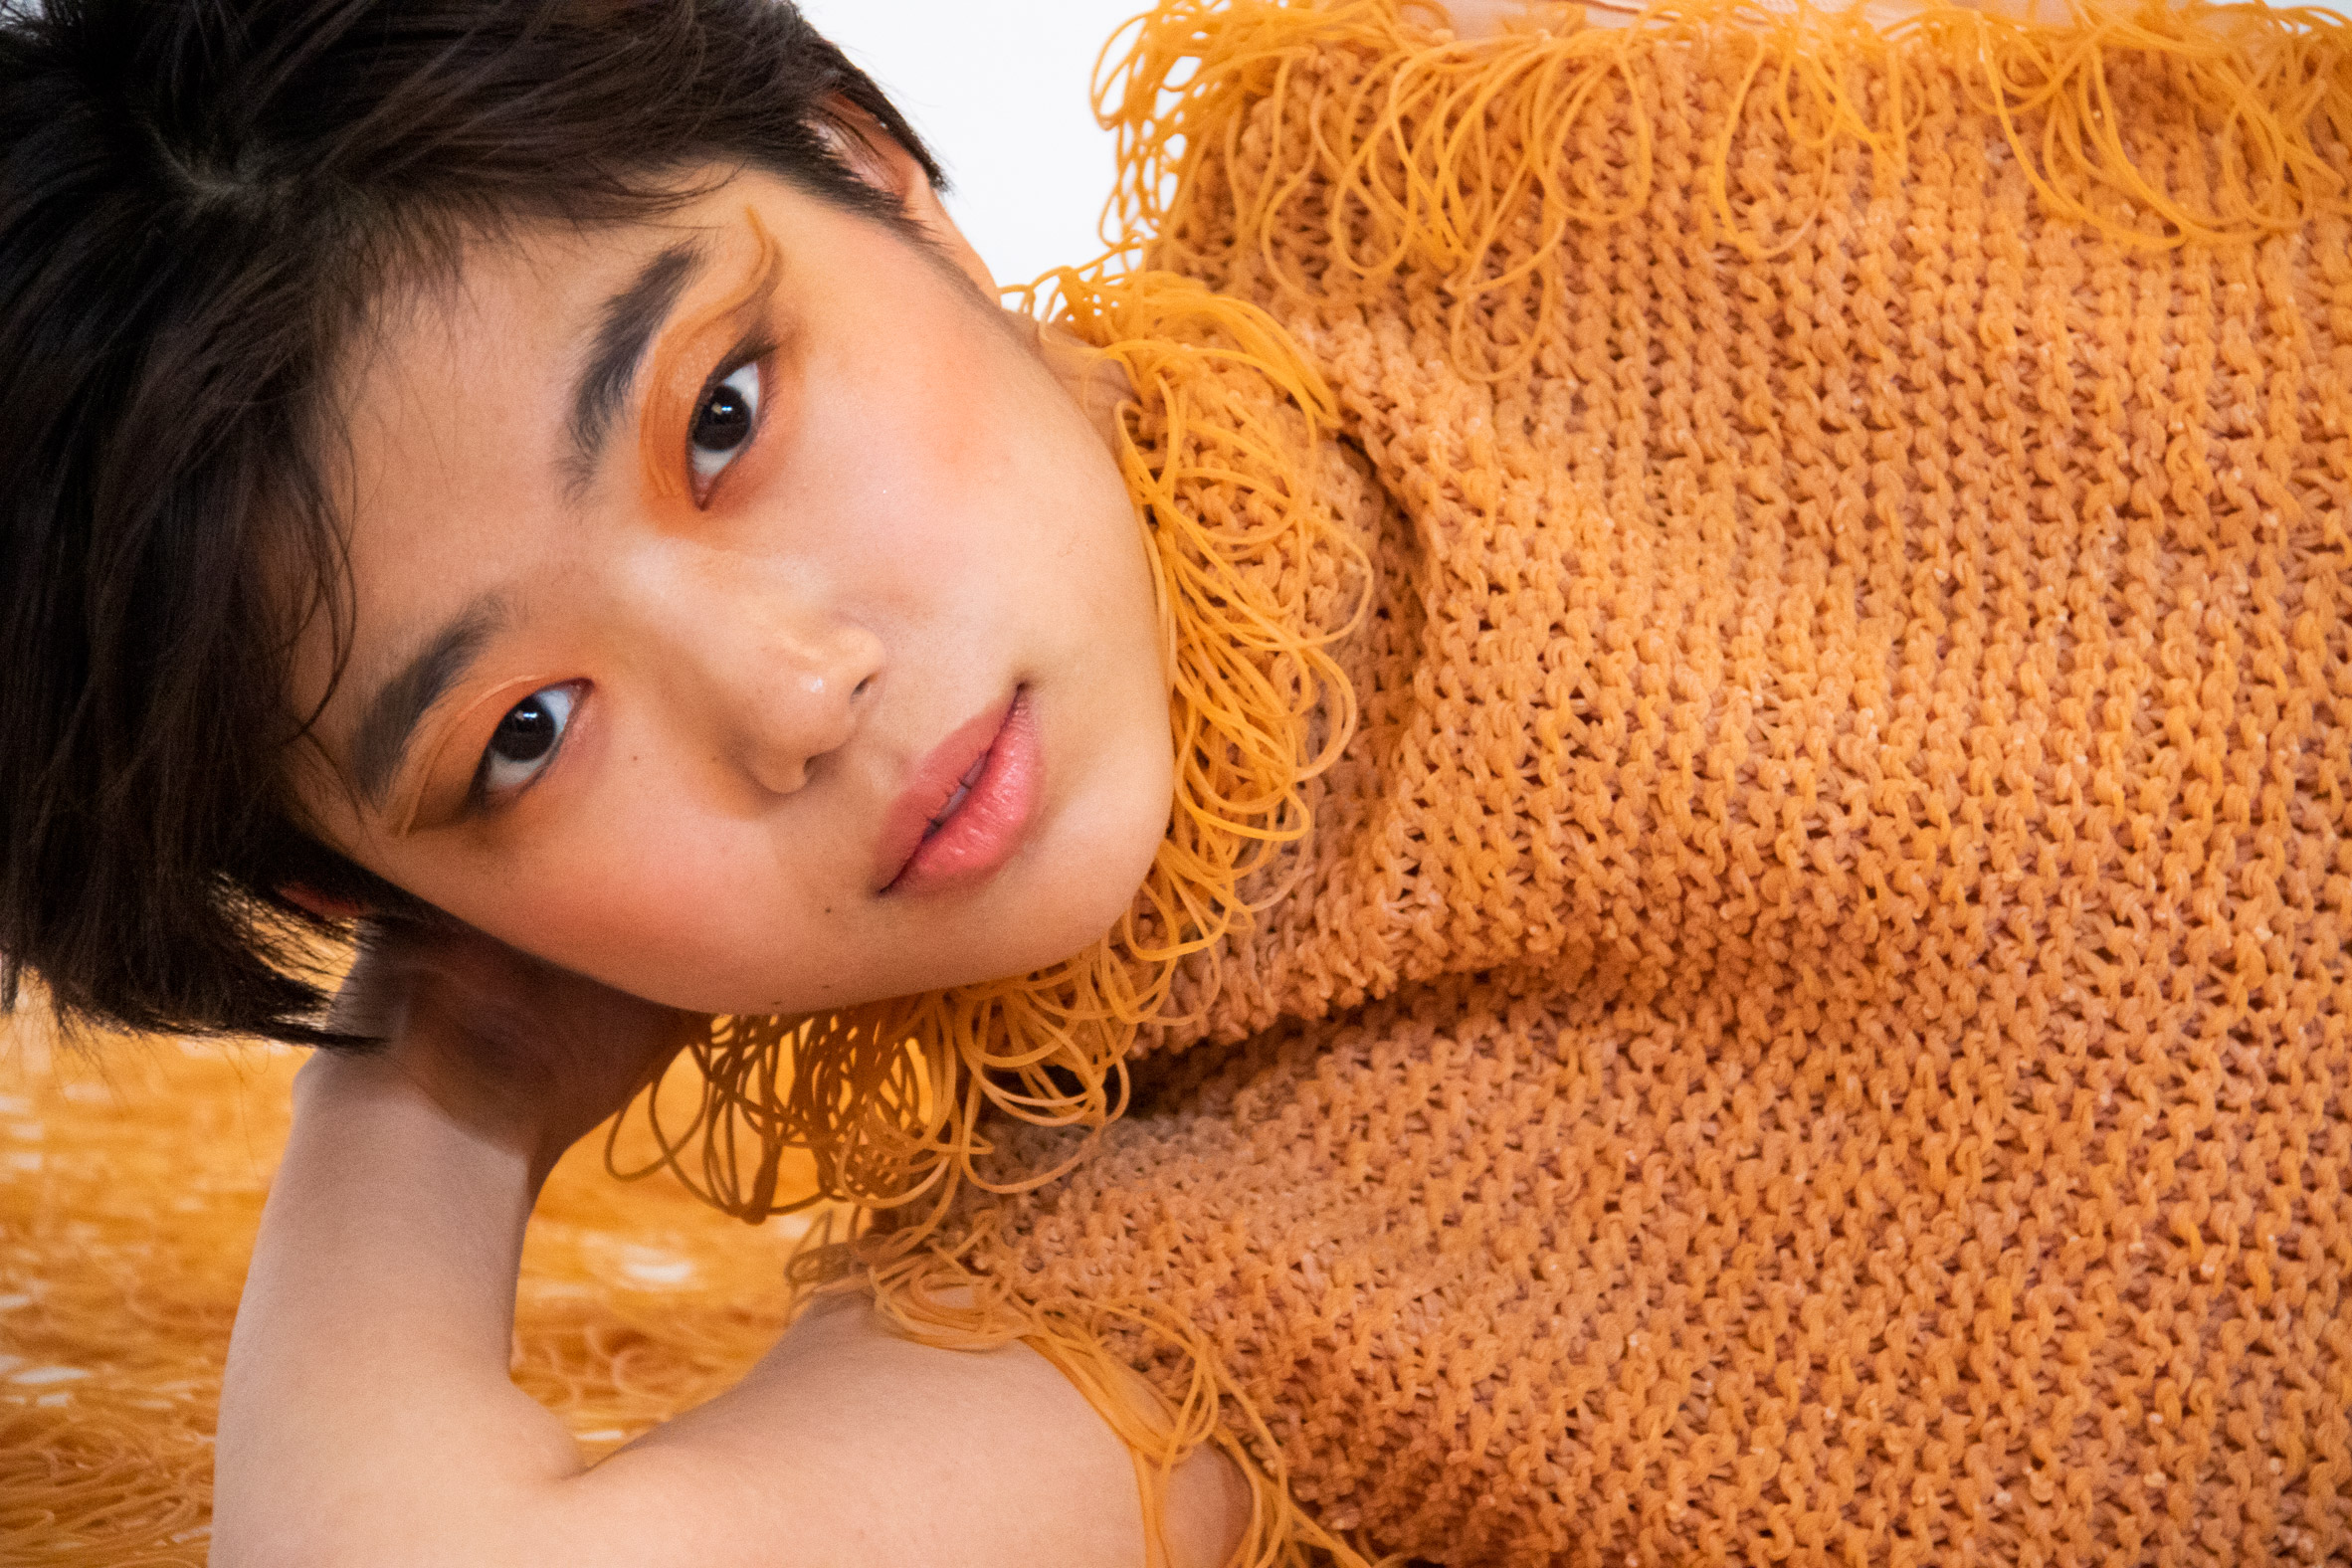 Rie Sakamoto knits rubber bands together like yarn for elastic garments